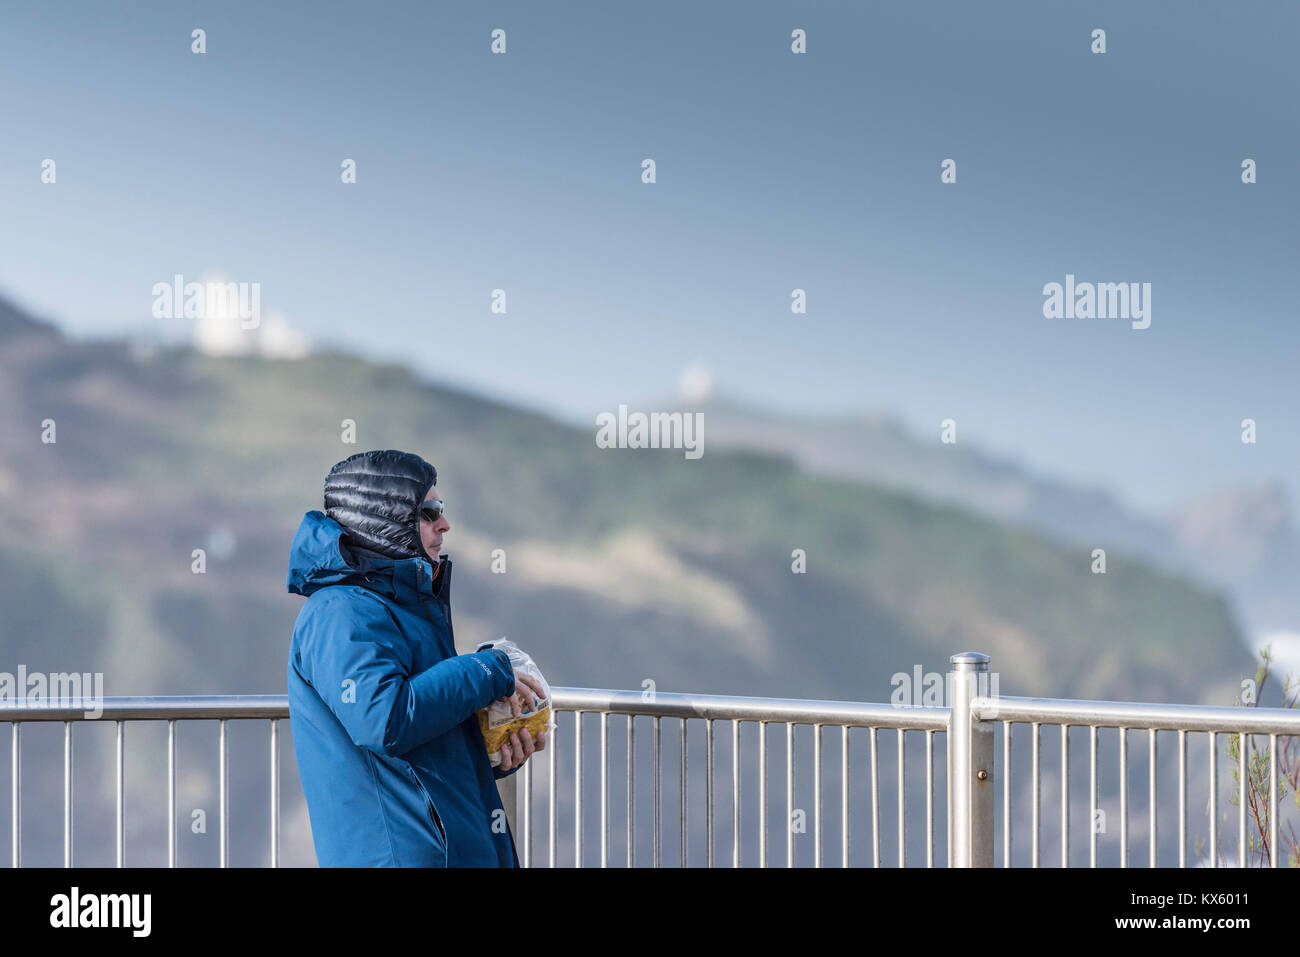 A man eating a snack and wearing warm clothes against the cold windy weather. Stock Photo